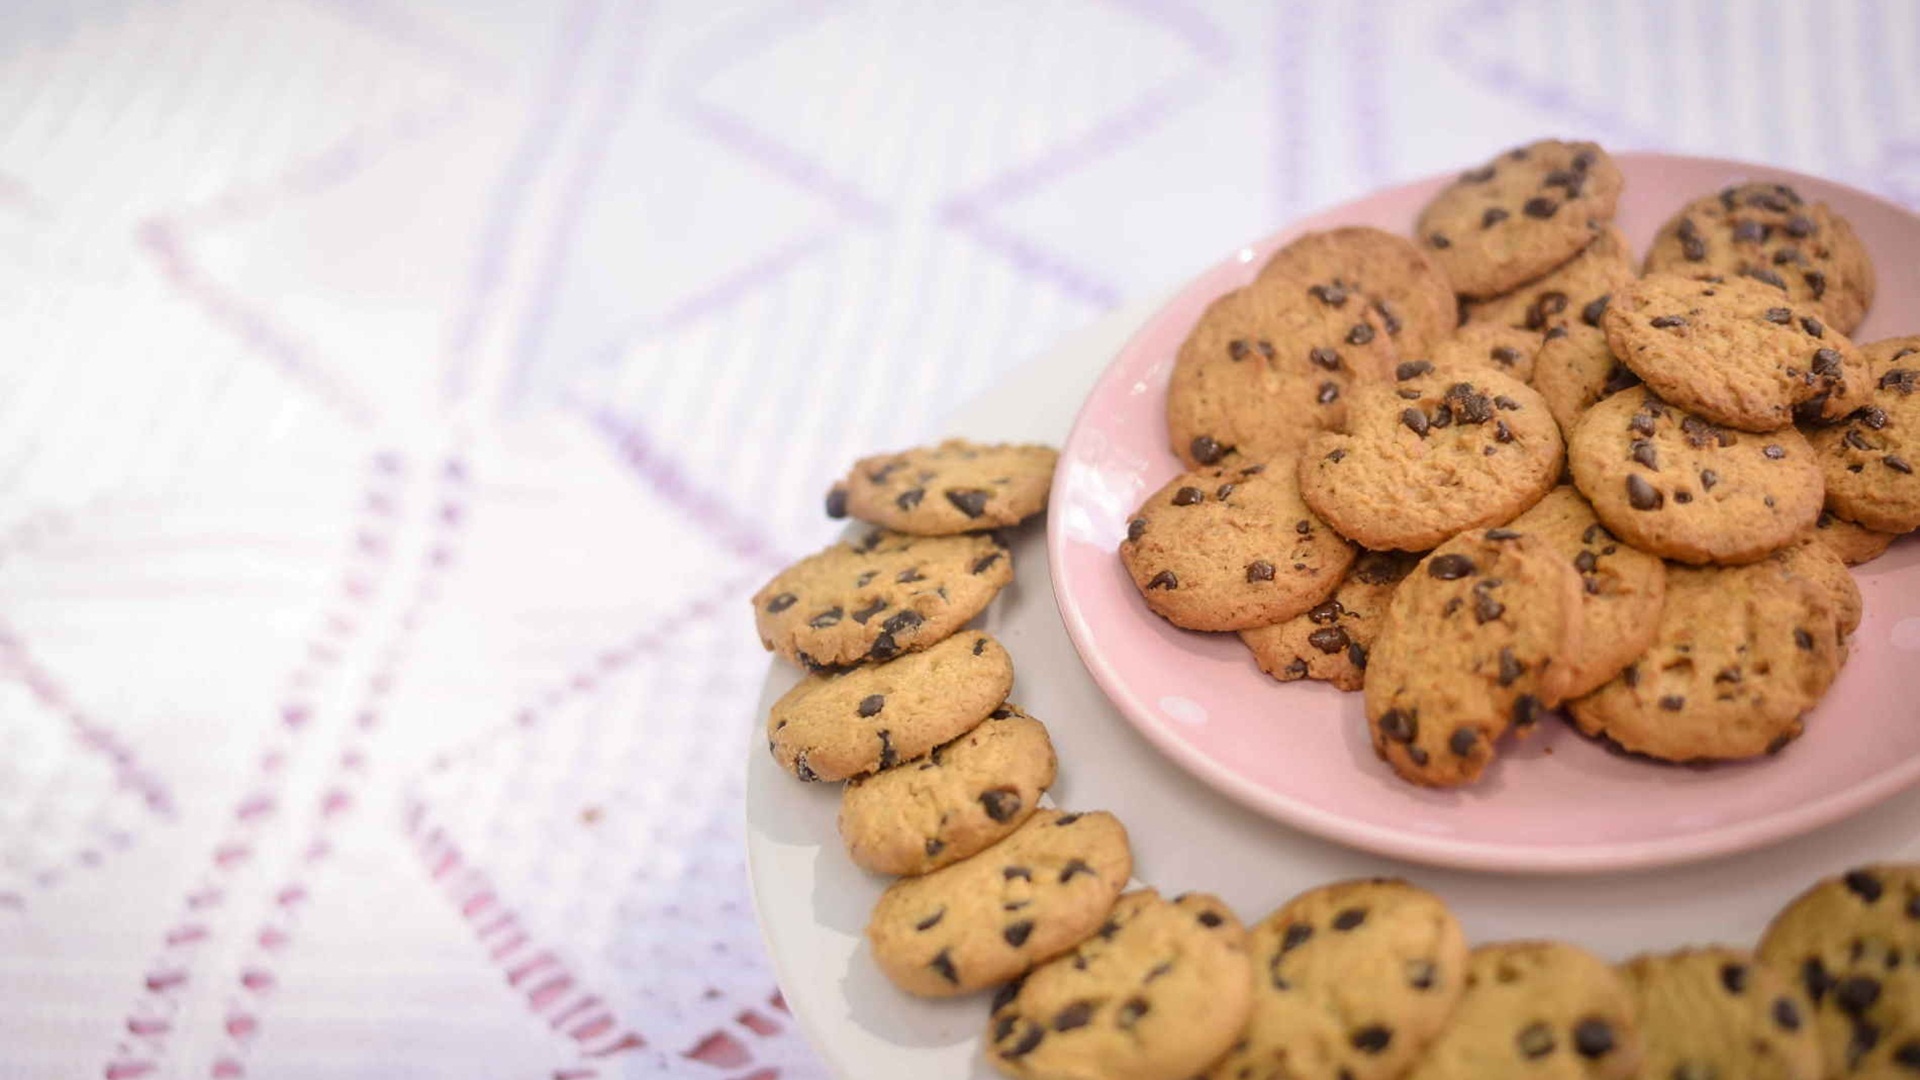 Biscuit: Chocolate chip cookie, Commonly made with white sugar, flour, salt, eggs. 1920x1080 Full HD Wallpaper.